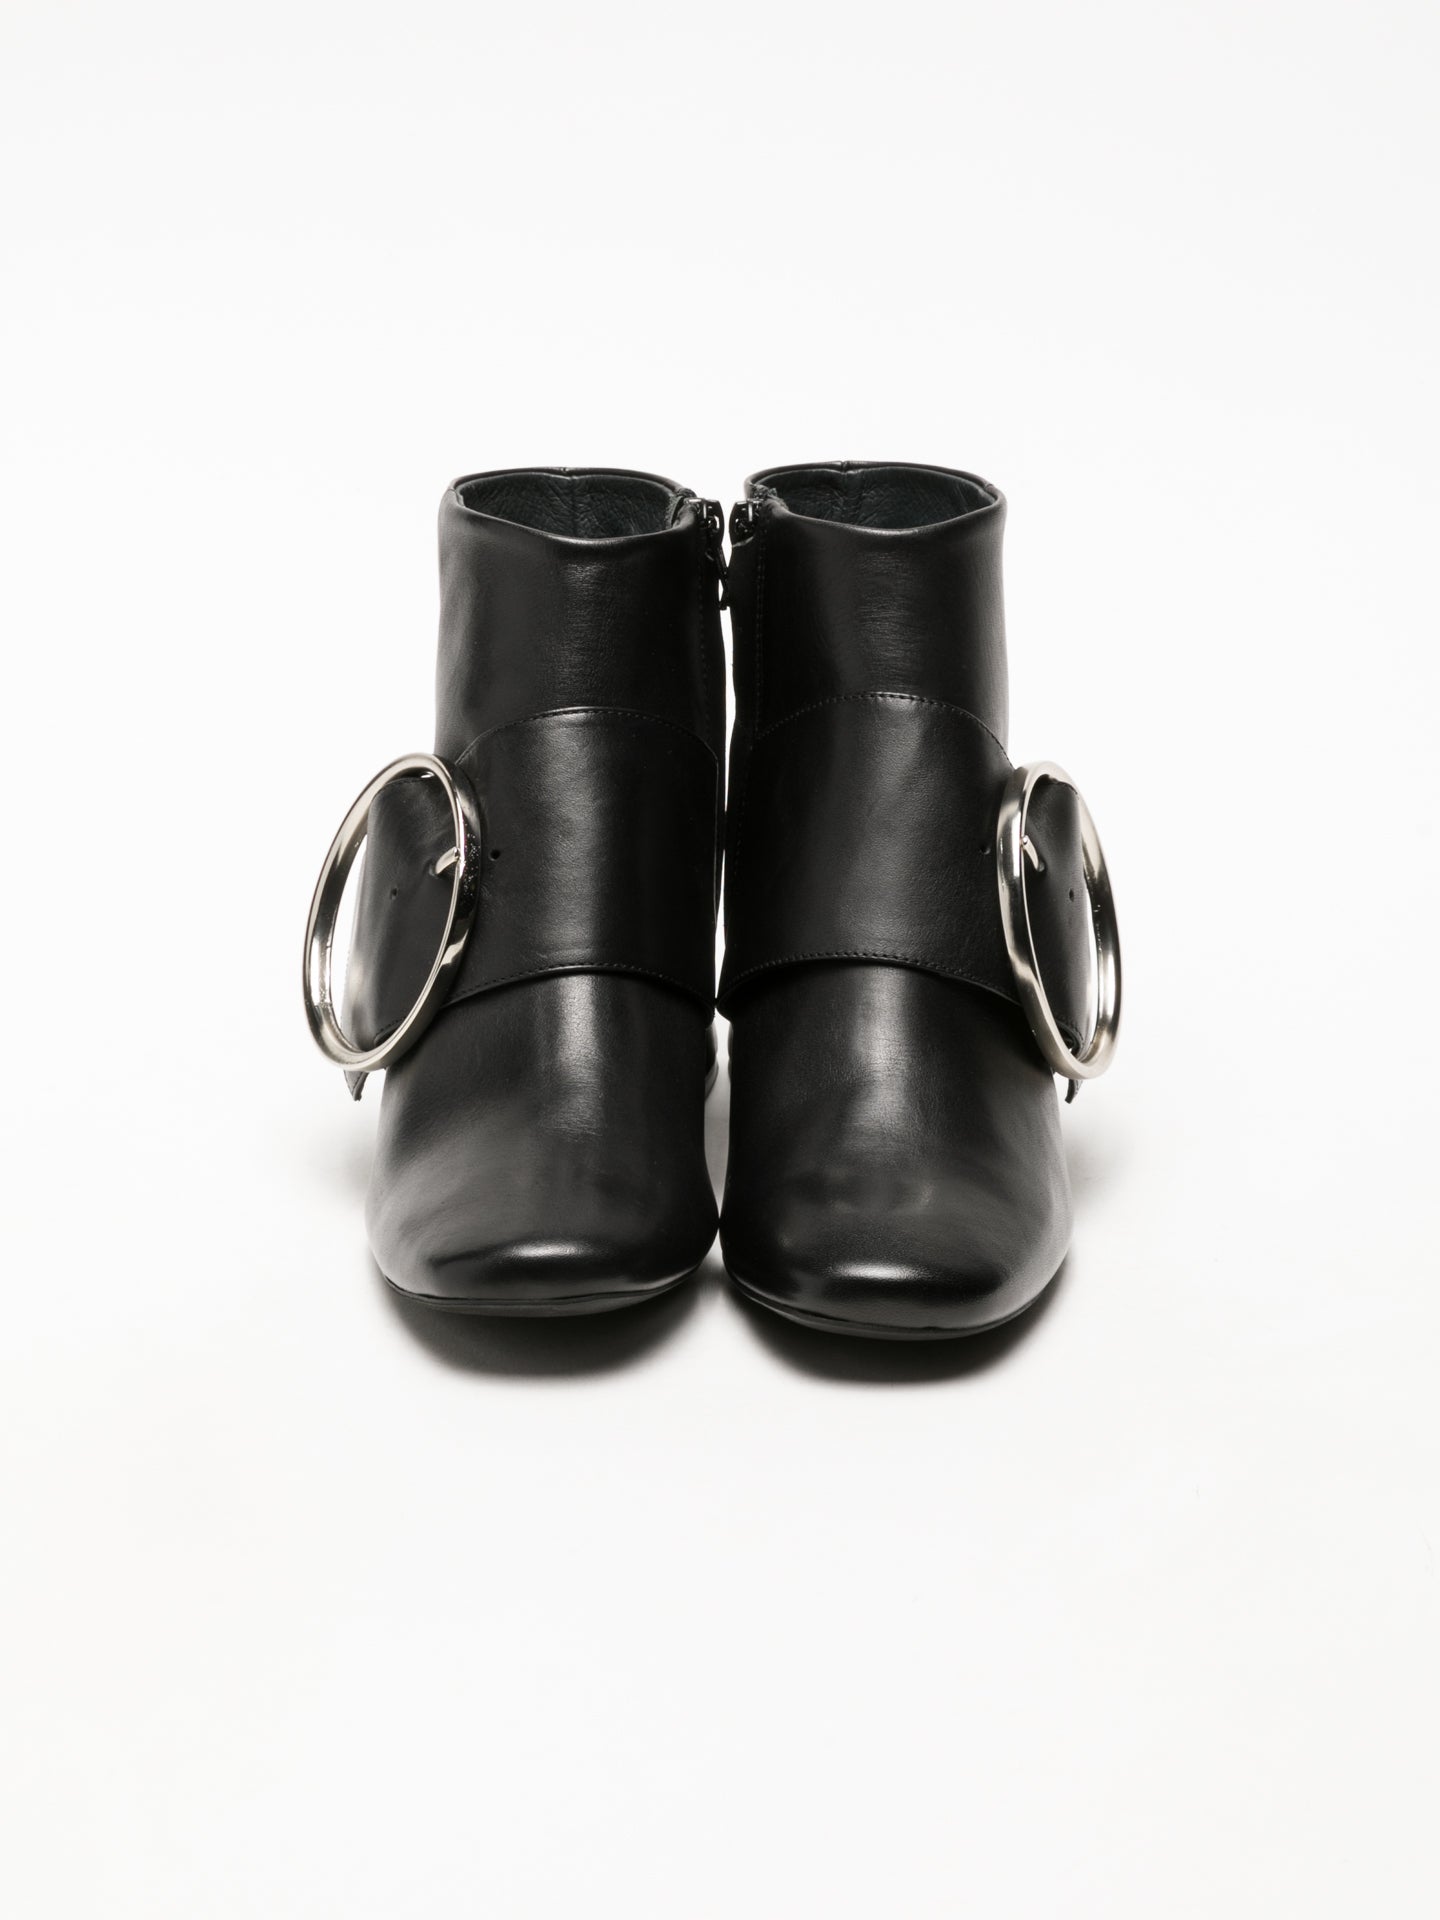 Foreva Black Buckle Ankle Boots